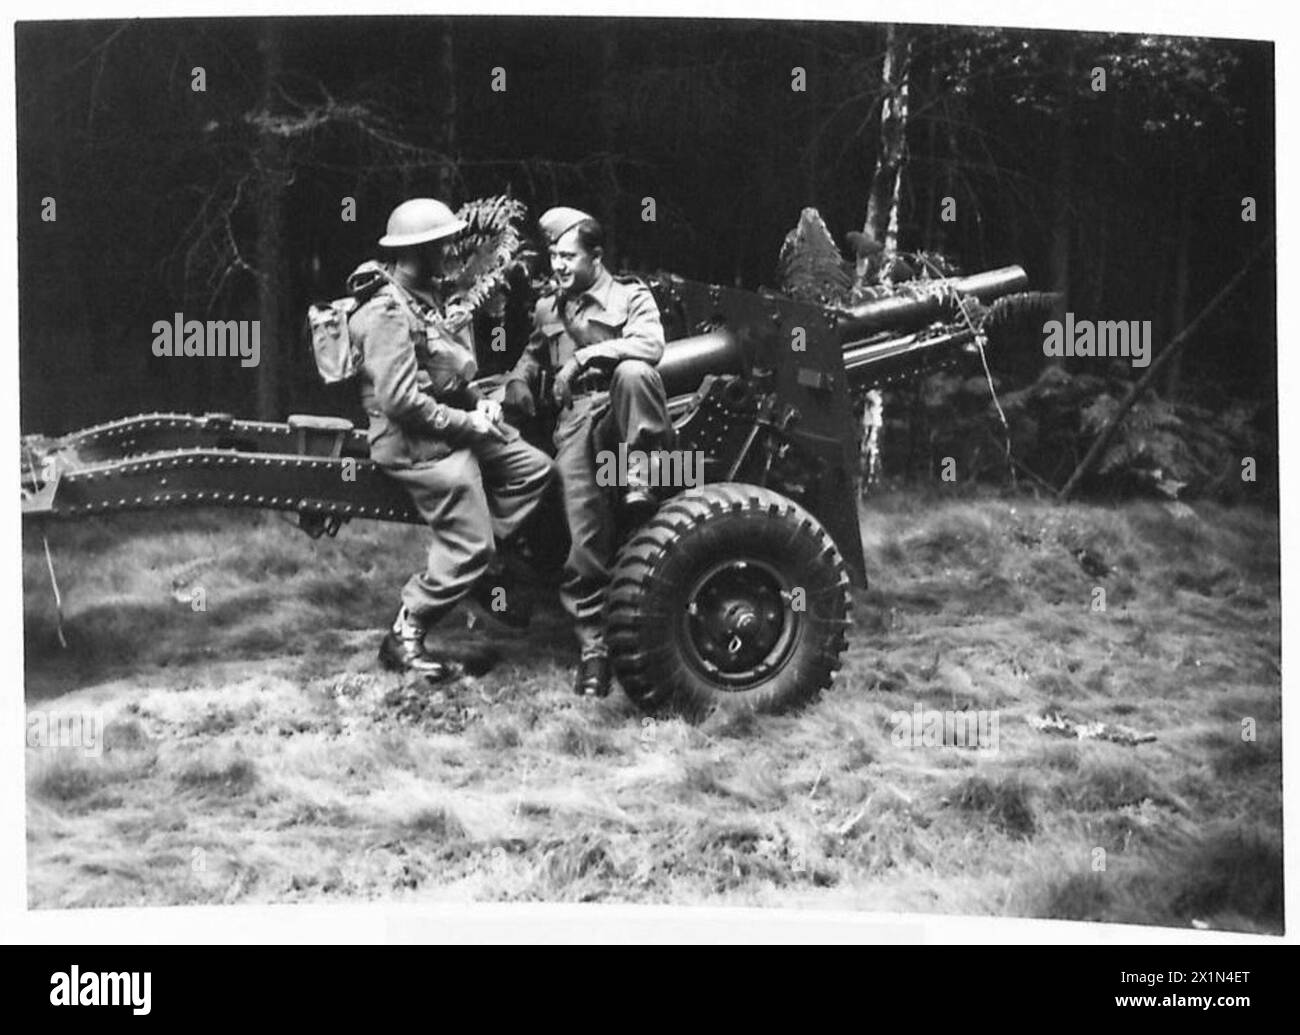 THE ALLIED ARMIES IN BRITAIN, 1940-1945 - A Polish gunner attached to the 229th Field Battery of the 58th Field Regiment, Royal Artillery chatting with one of the British gunners to improve his knowledge of the English language by their 25 pounder artillery gun, 25 August 1940. Photograph taken during an exercise between Northland and Southland armies near Bawtry, British Army, British Army, Royal Artillery, Polish Army, Polish Armed Forces in the West, 1st Corps Stock Photo